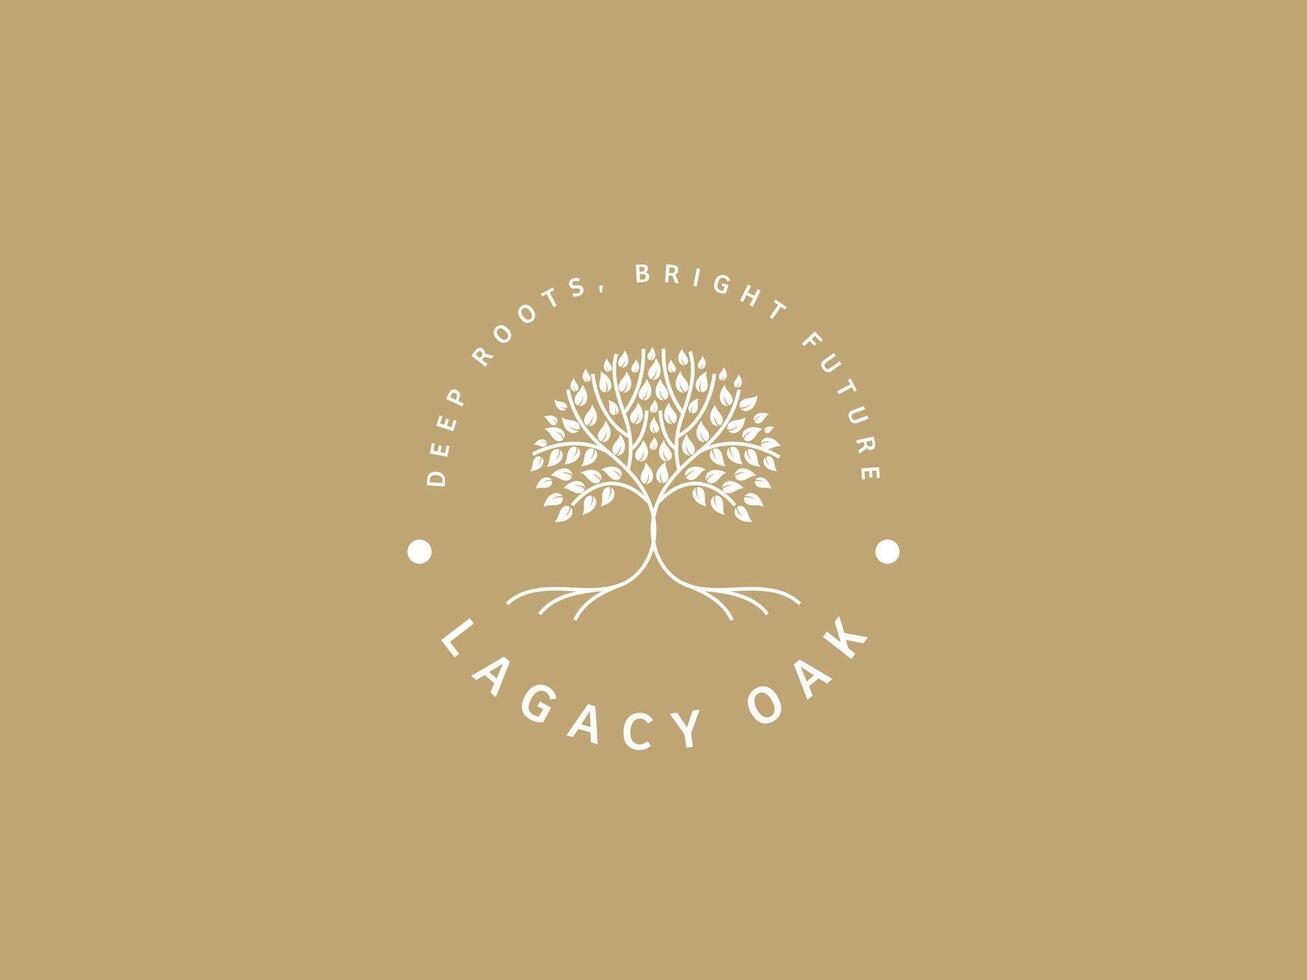 Logo Template for Business and Company with Oak Tree vector